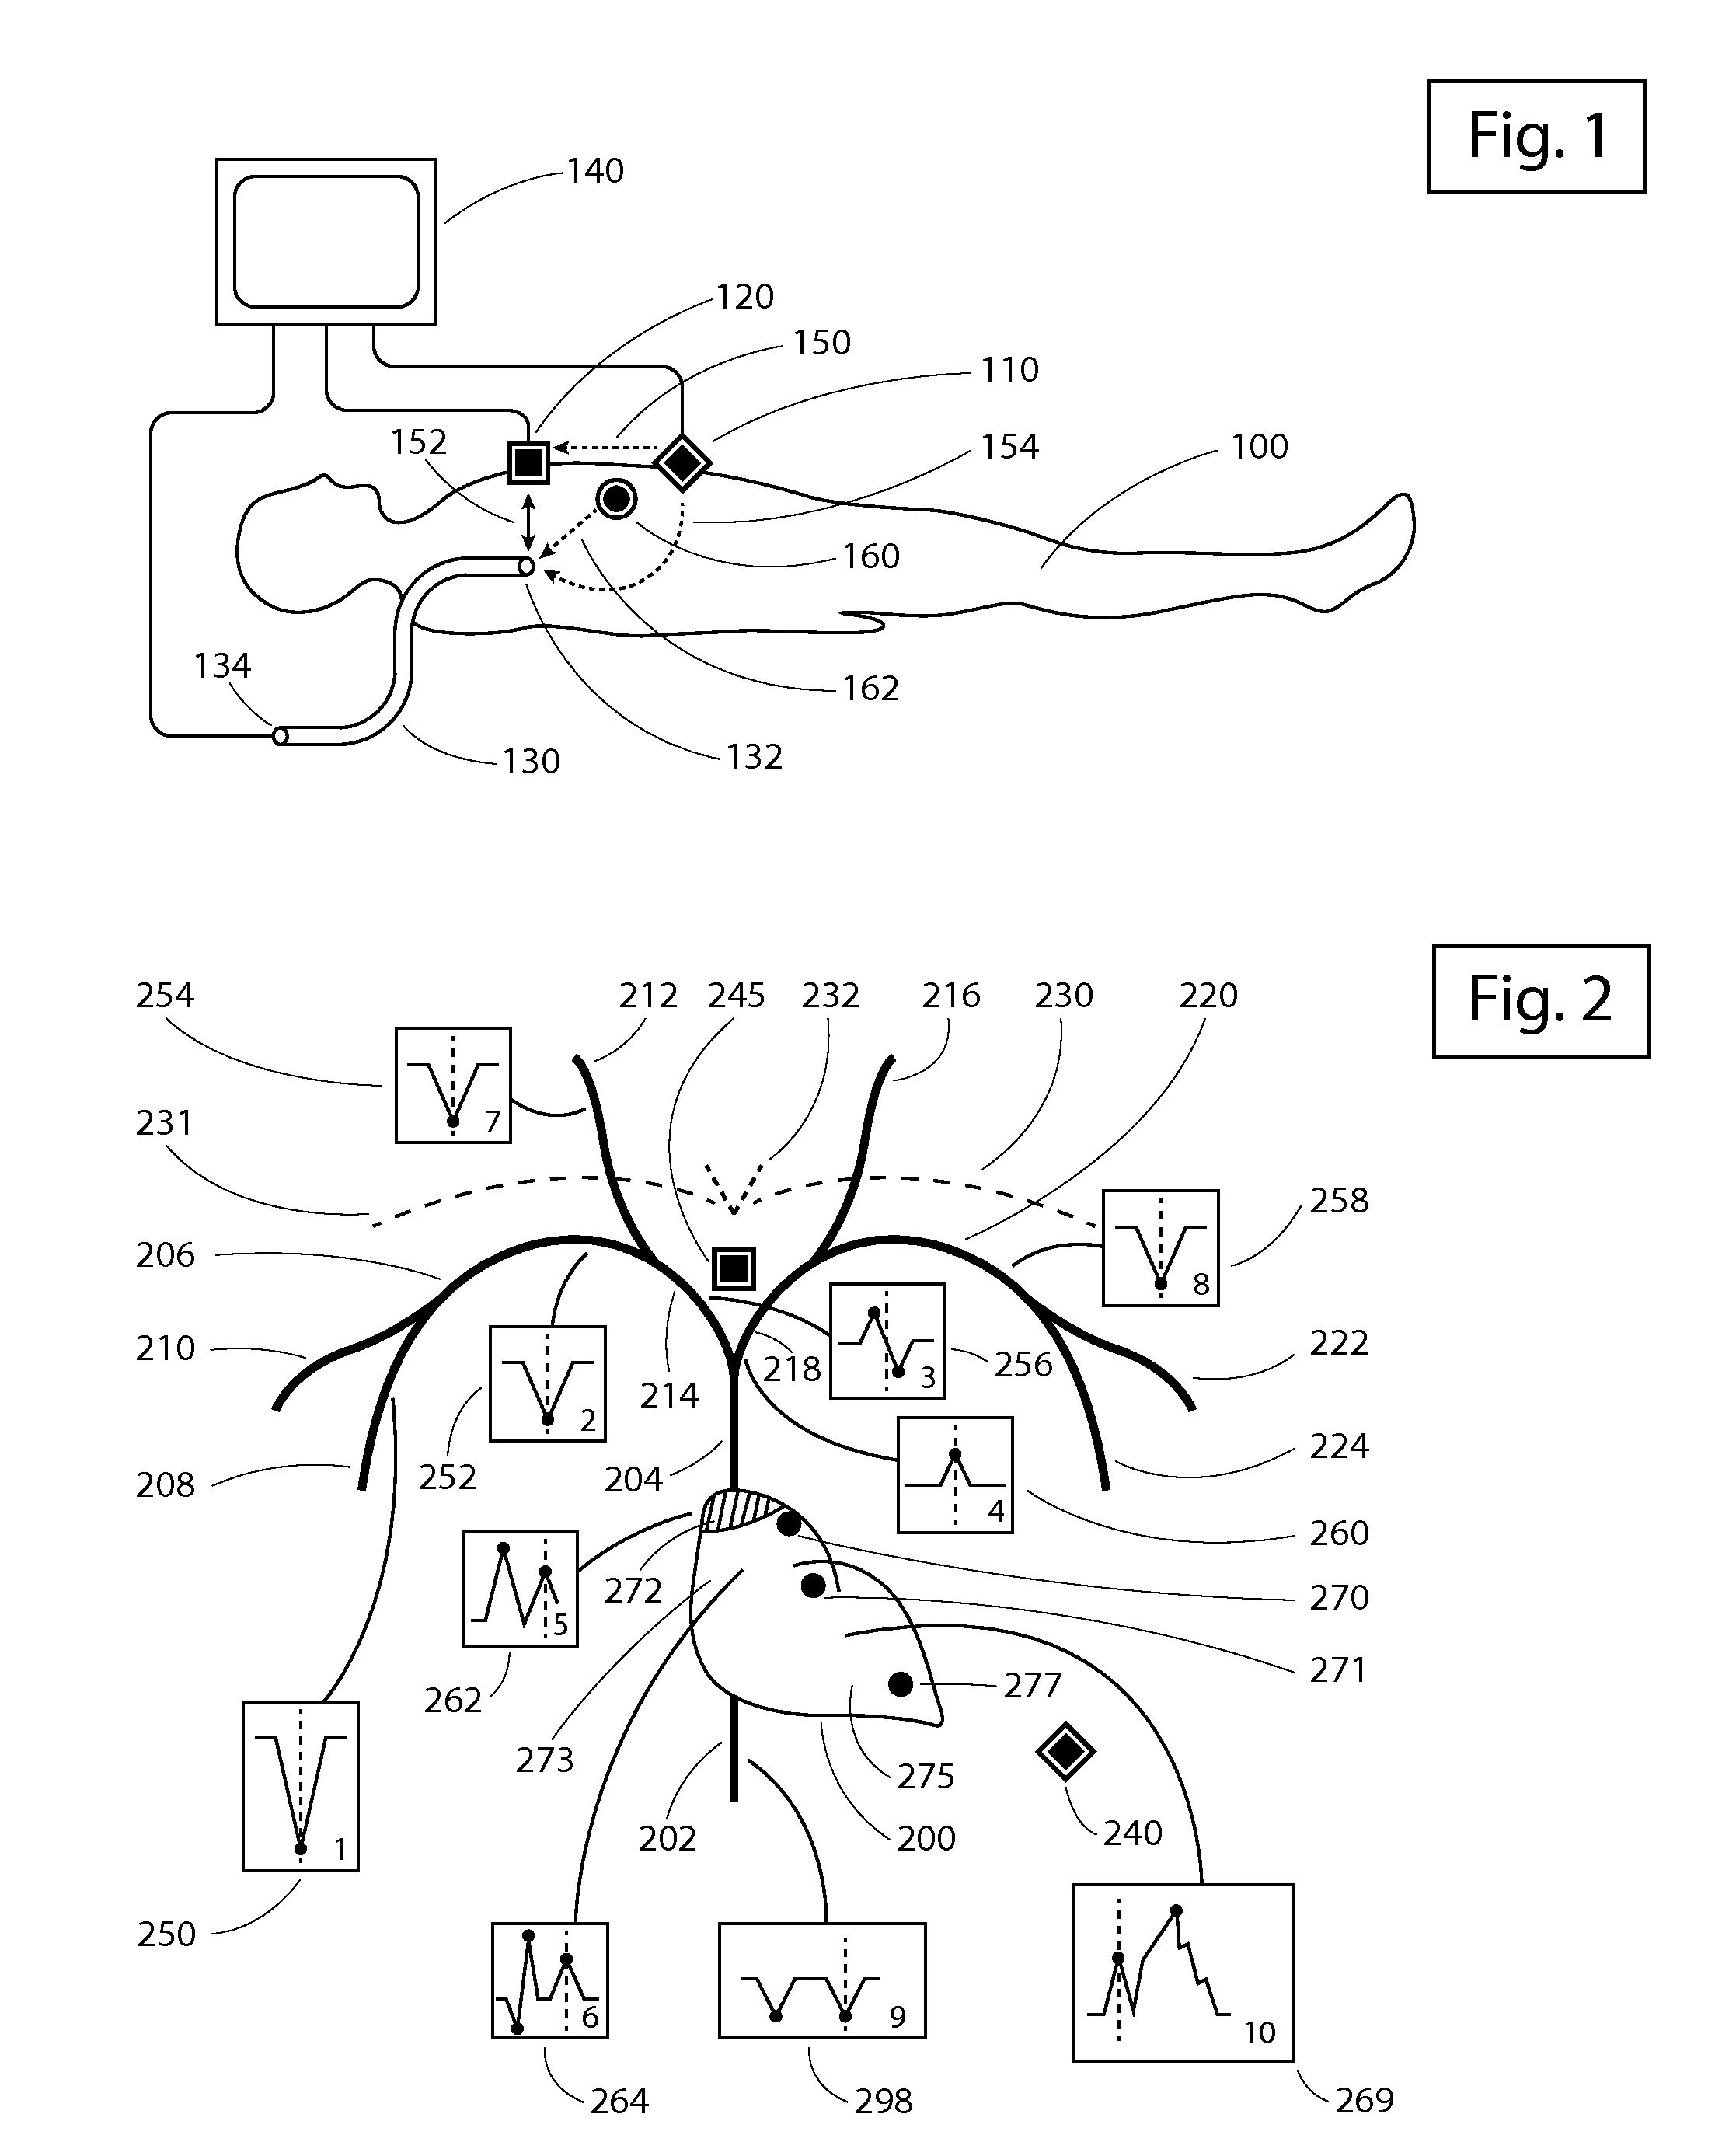 Apparatus and method for intravascular catheter navigation using the electrical conduction system of the heart and control electrodes